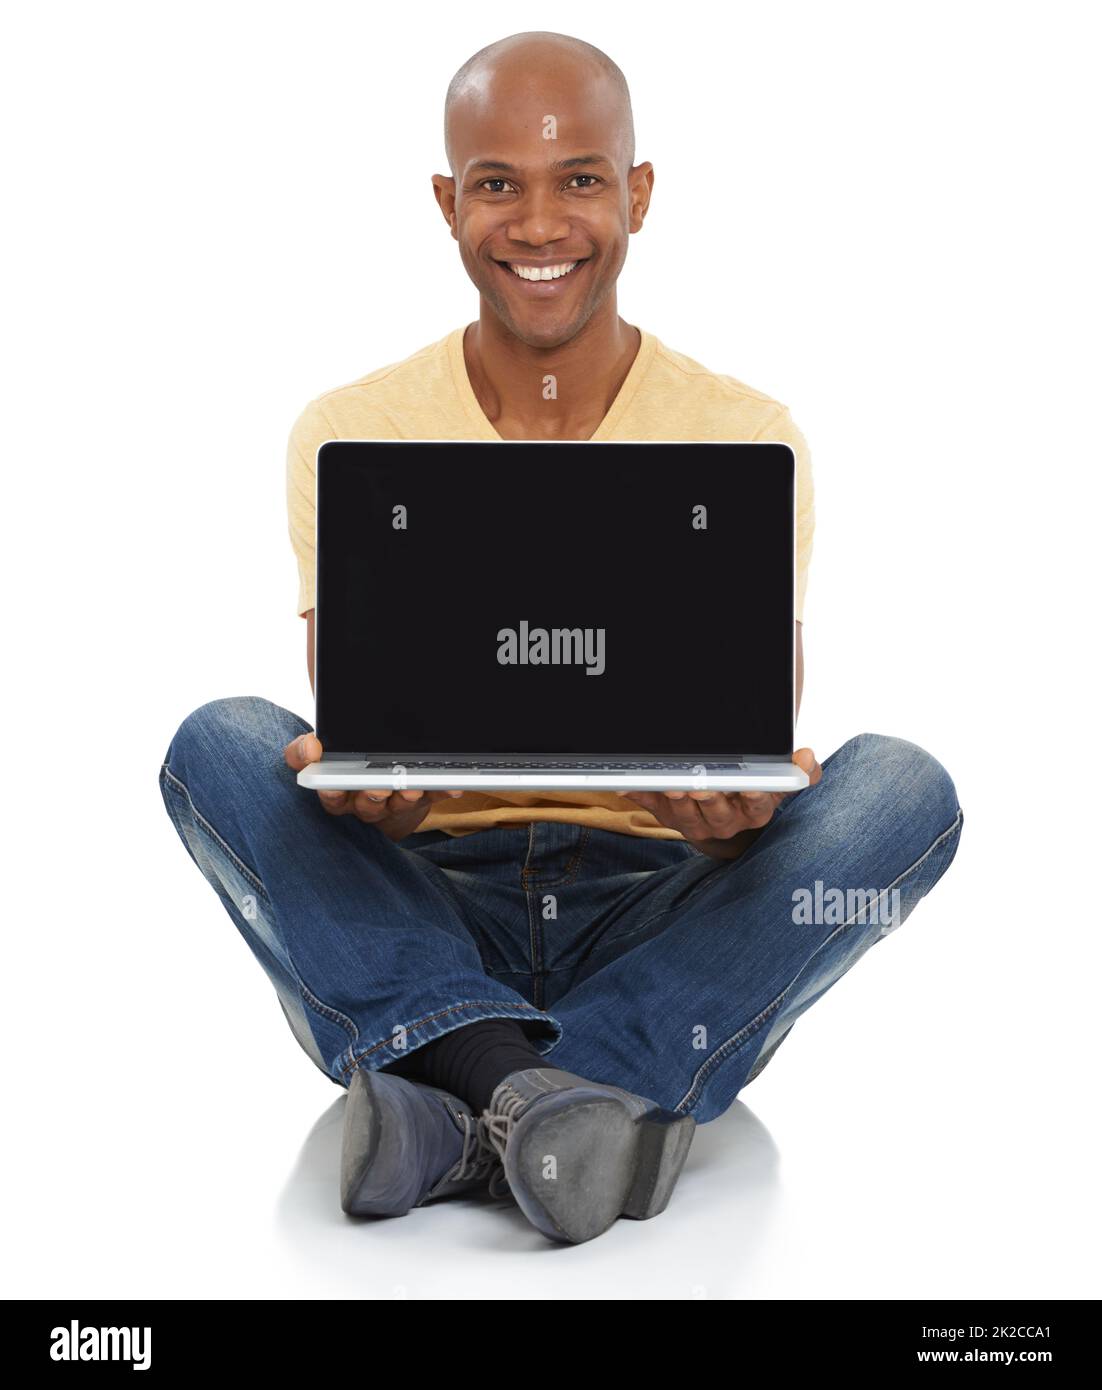 Presenting the future of technology. Studio shot of a smiling African-American man sitting and holding a laptop out in front of him. Stock Photo